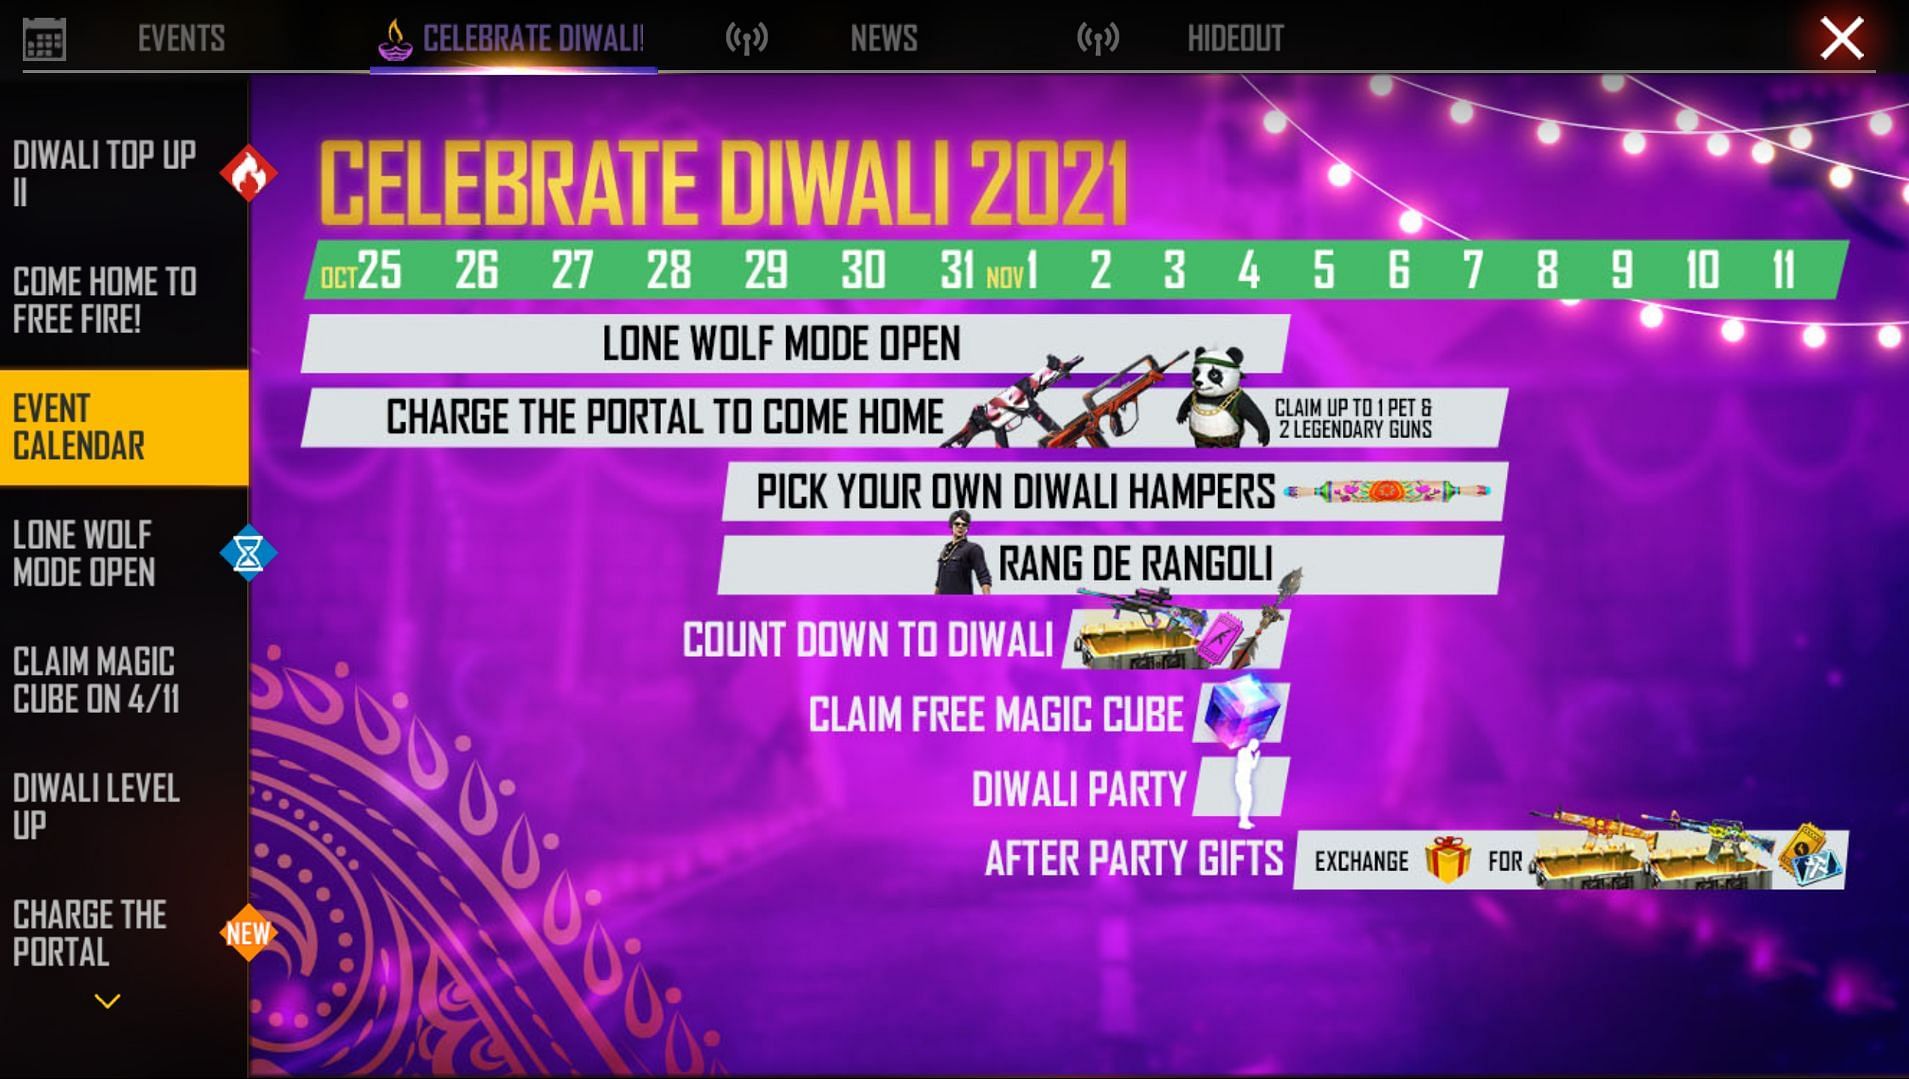 Rang De Rangoli event will be available between 29 October and 7 November (Image via Free Fire)